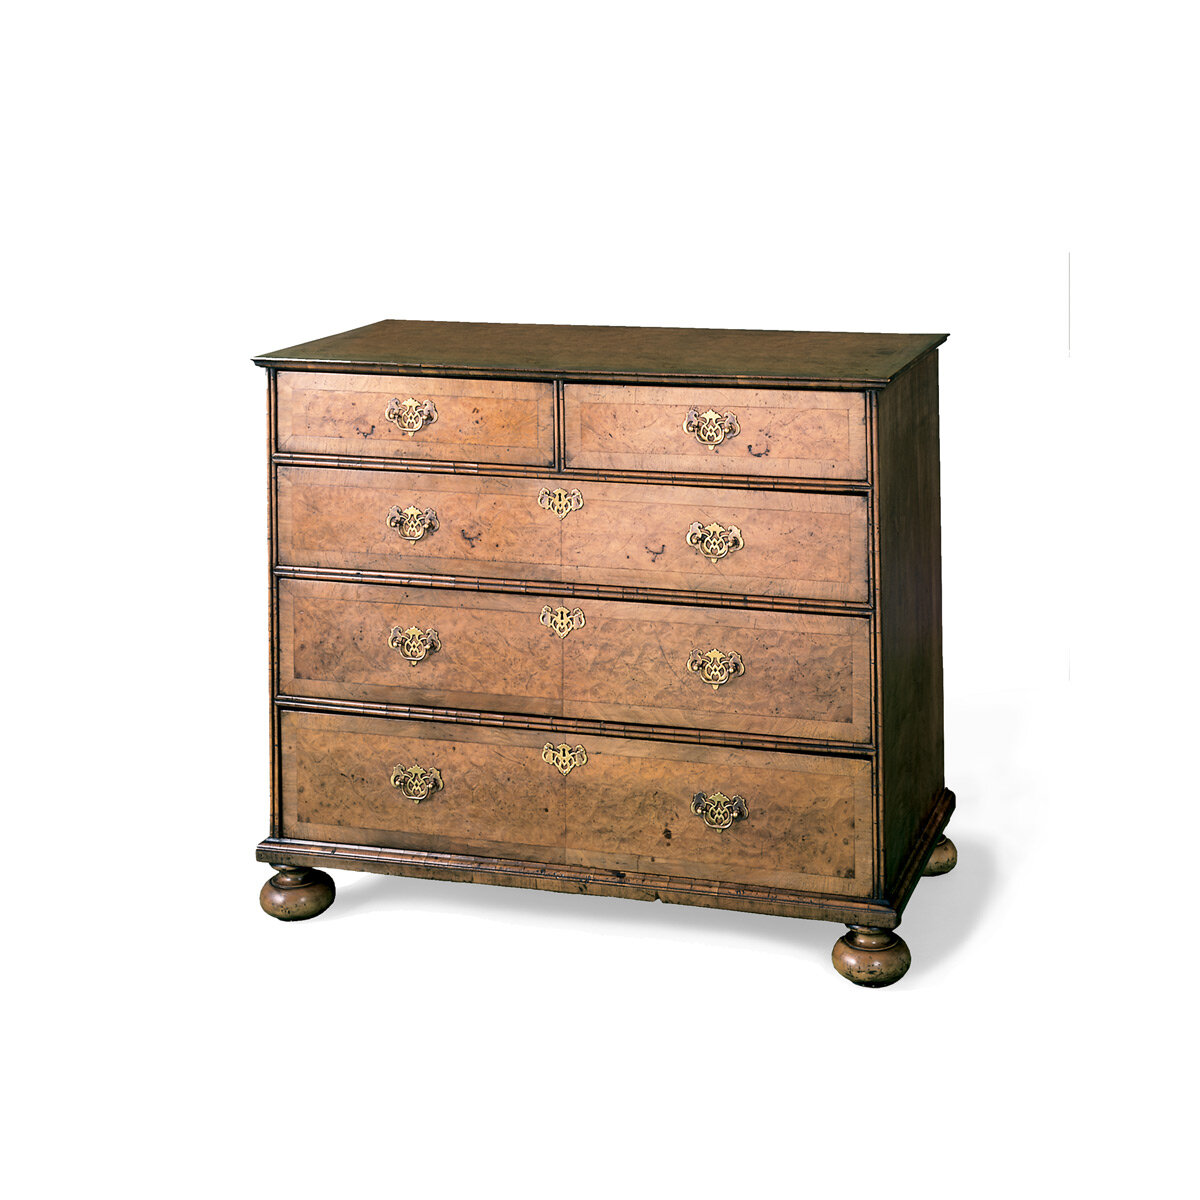 William & Mary Style Chest with Bun Feet and Cross Grain Moldings